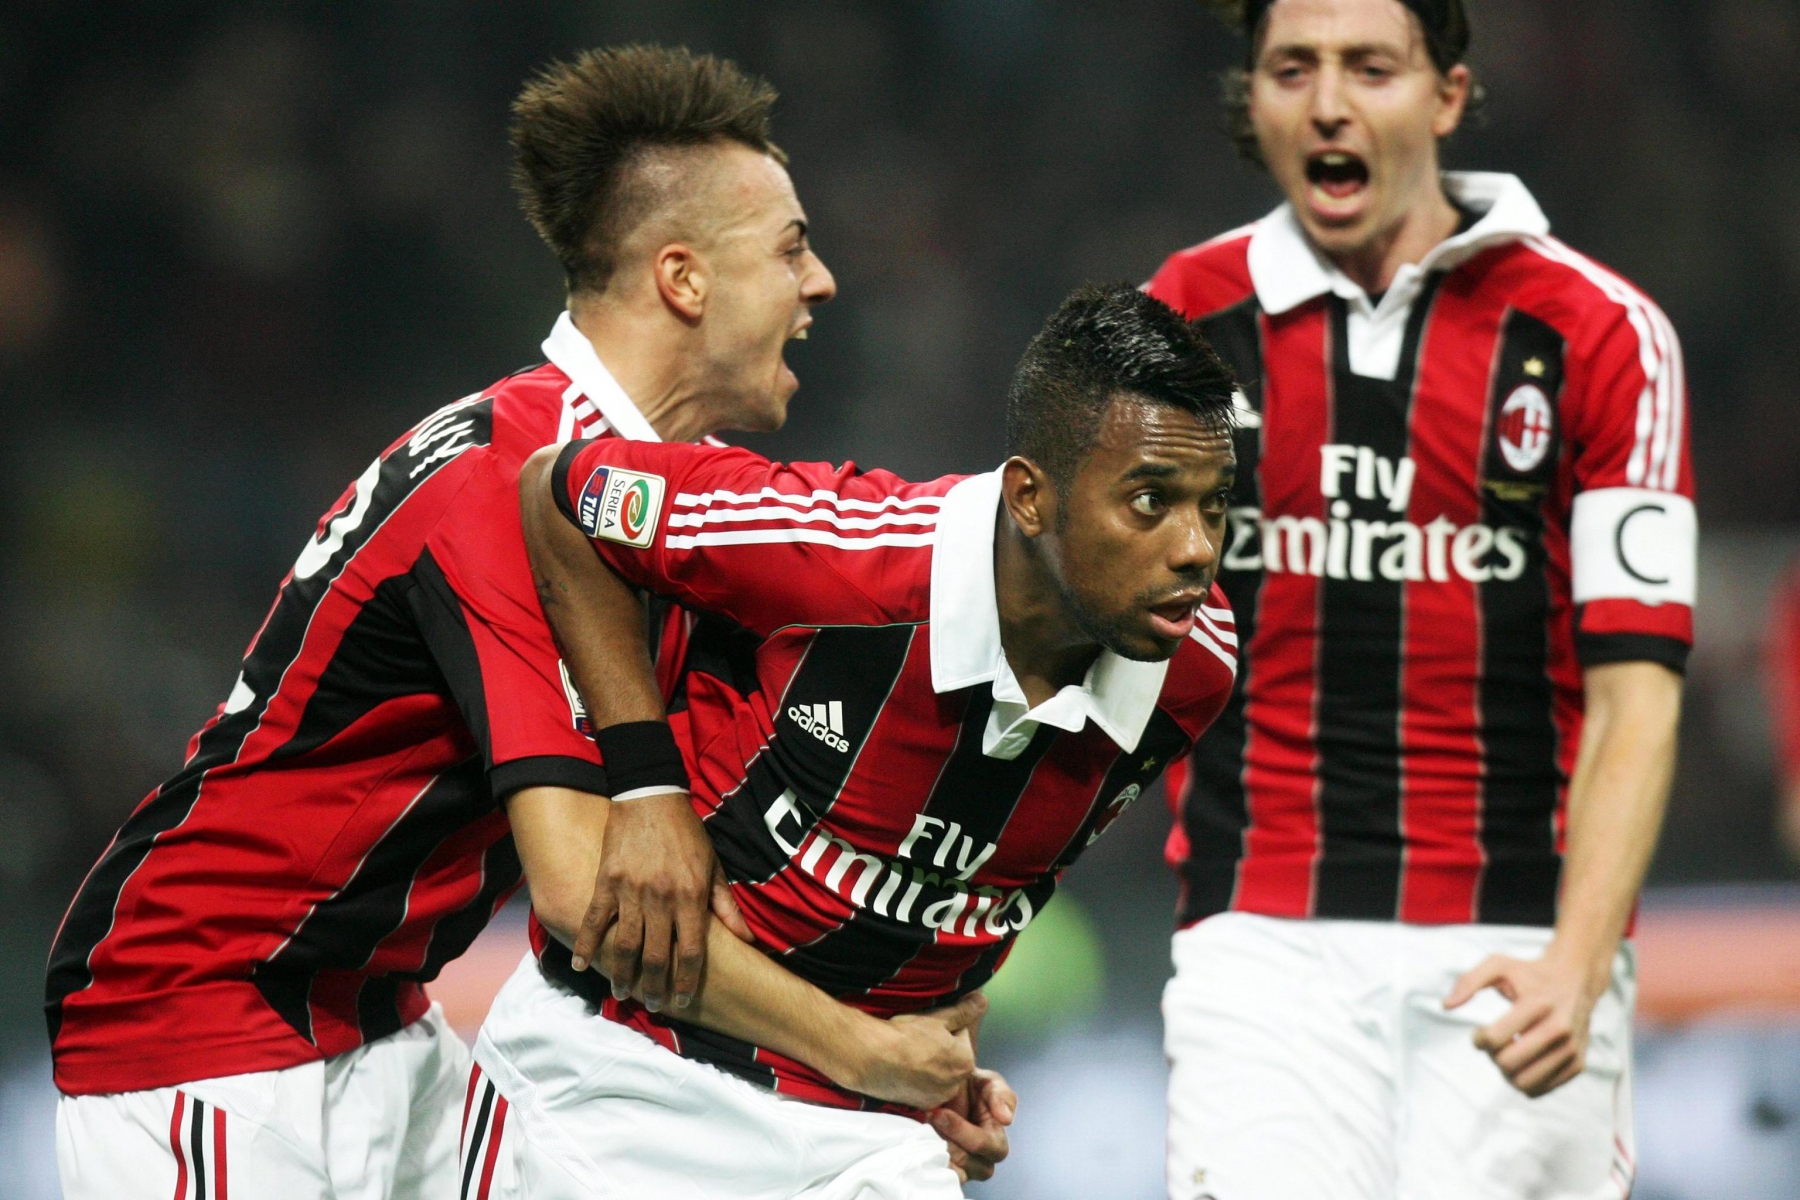 epa03486700 AC Milan's Brazilian forward Robinho (C) celebrates with his teammates Stephan El Shaarawy (L) and Riccardo Montolivo (R) after scoring the 1-0 lead from the penalty spot during the Italian Serie A soccer match between AC Milan and Juventus FC at Giuseppe Meazza stadium in Milan, Italy, 25 November 2012.  EPA/MATTEO BAZZI